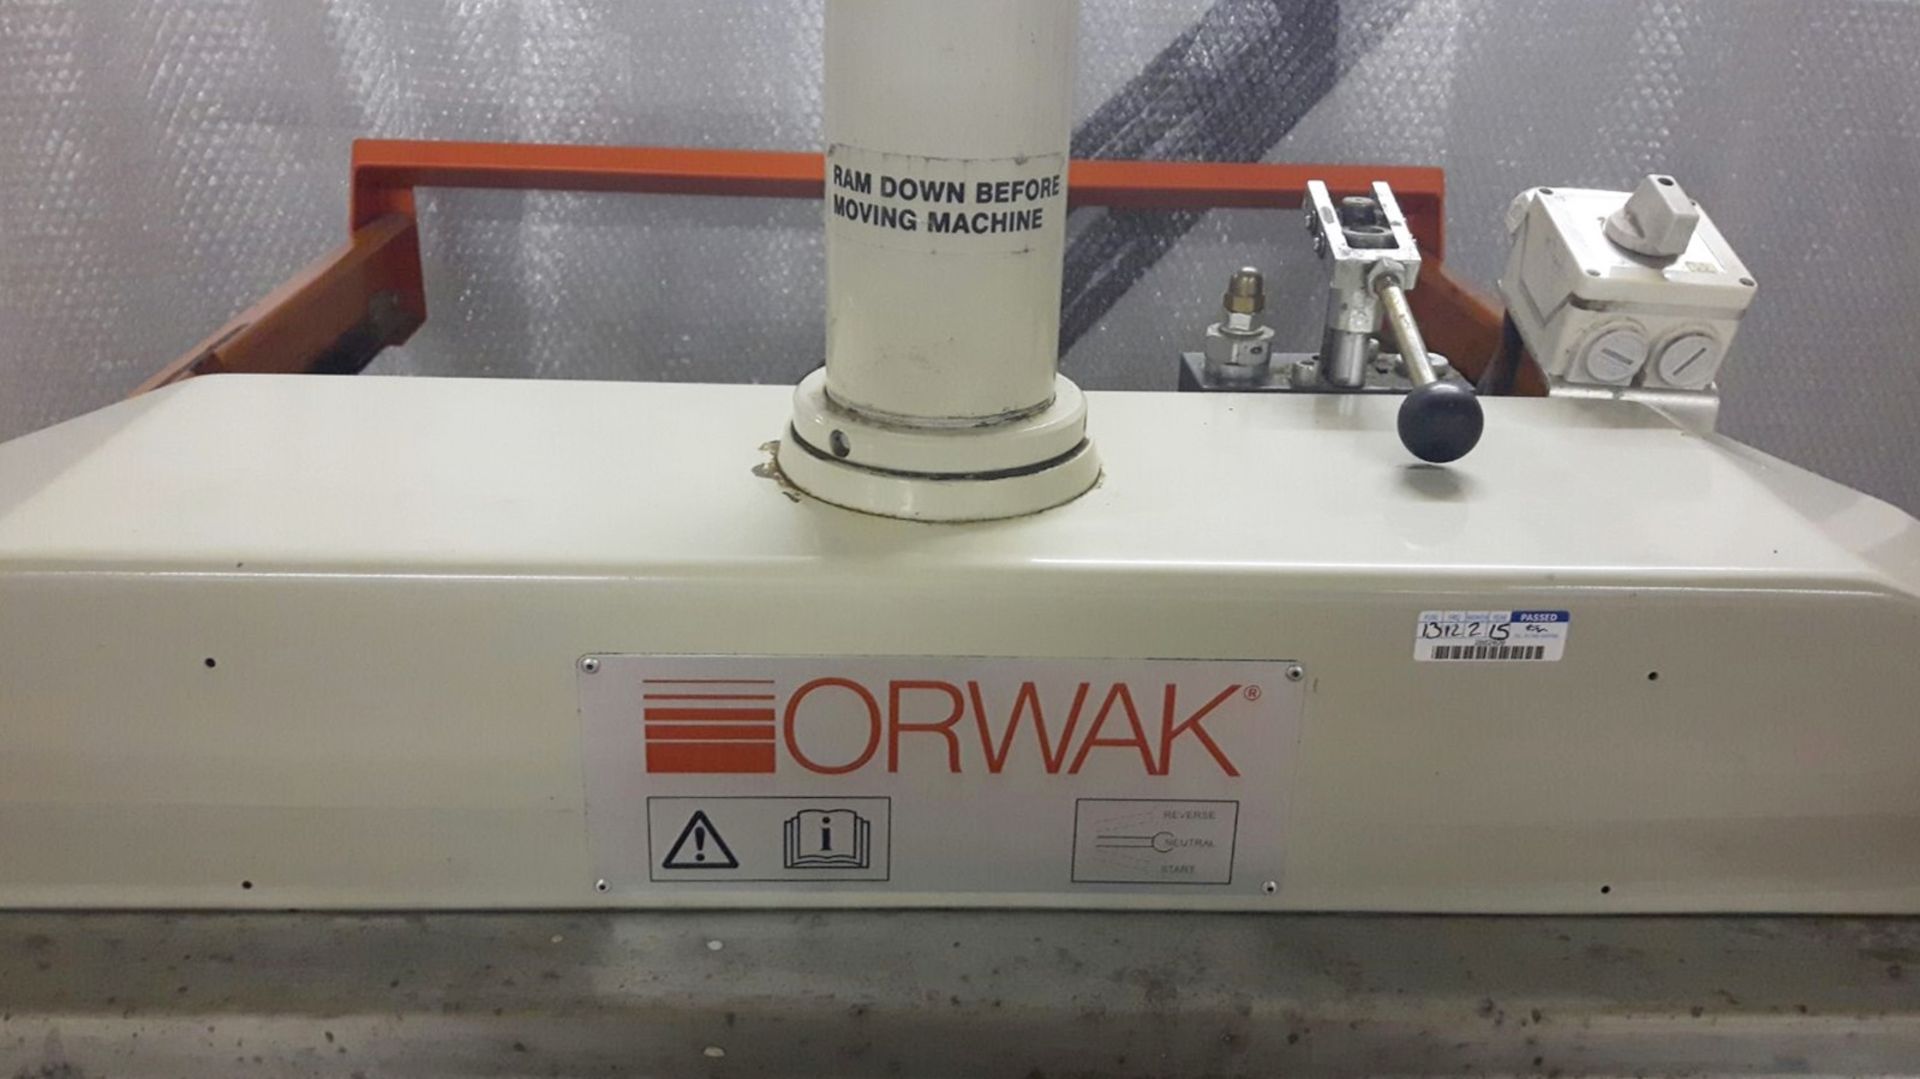 1 x Orwak 5010E Hydaulic Press Compact Baler - Used For Compacting Recyclable or Non-Recyclable - Image 4 of 8